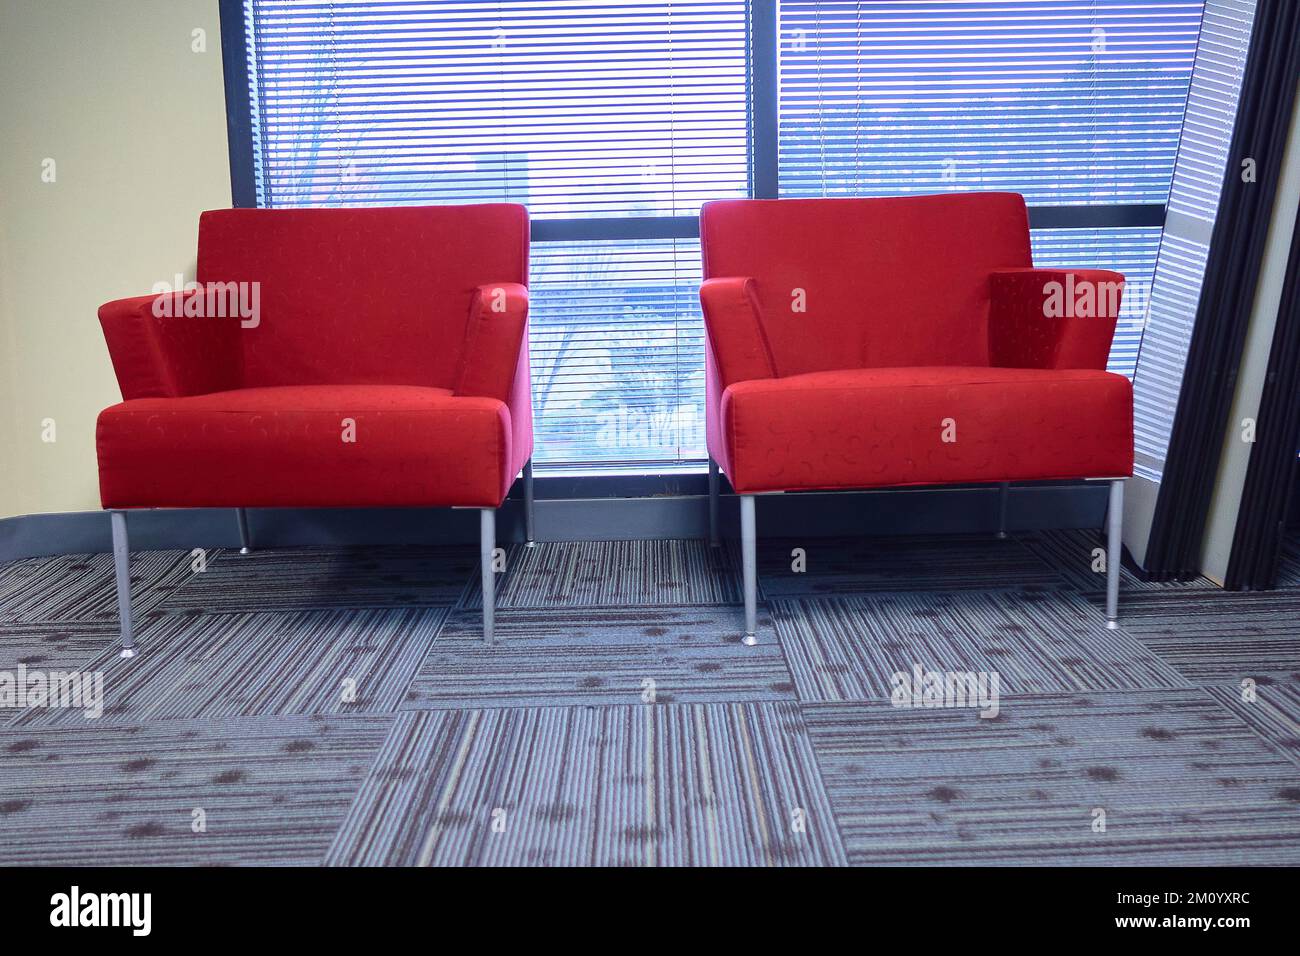 Two red chairs in a office building carpet by a window Stock Photo